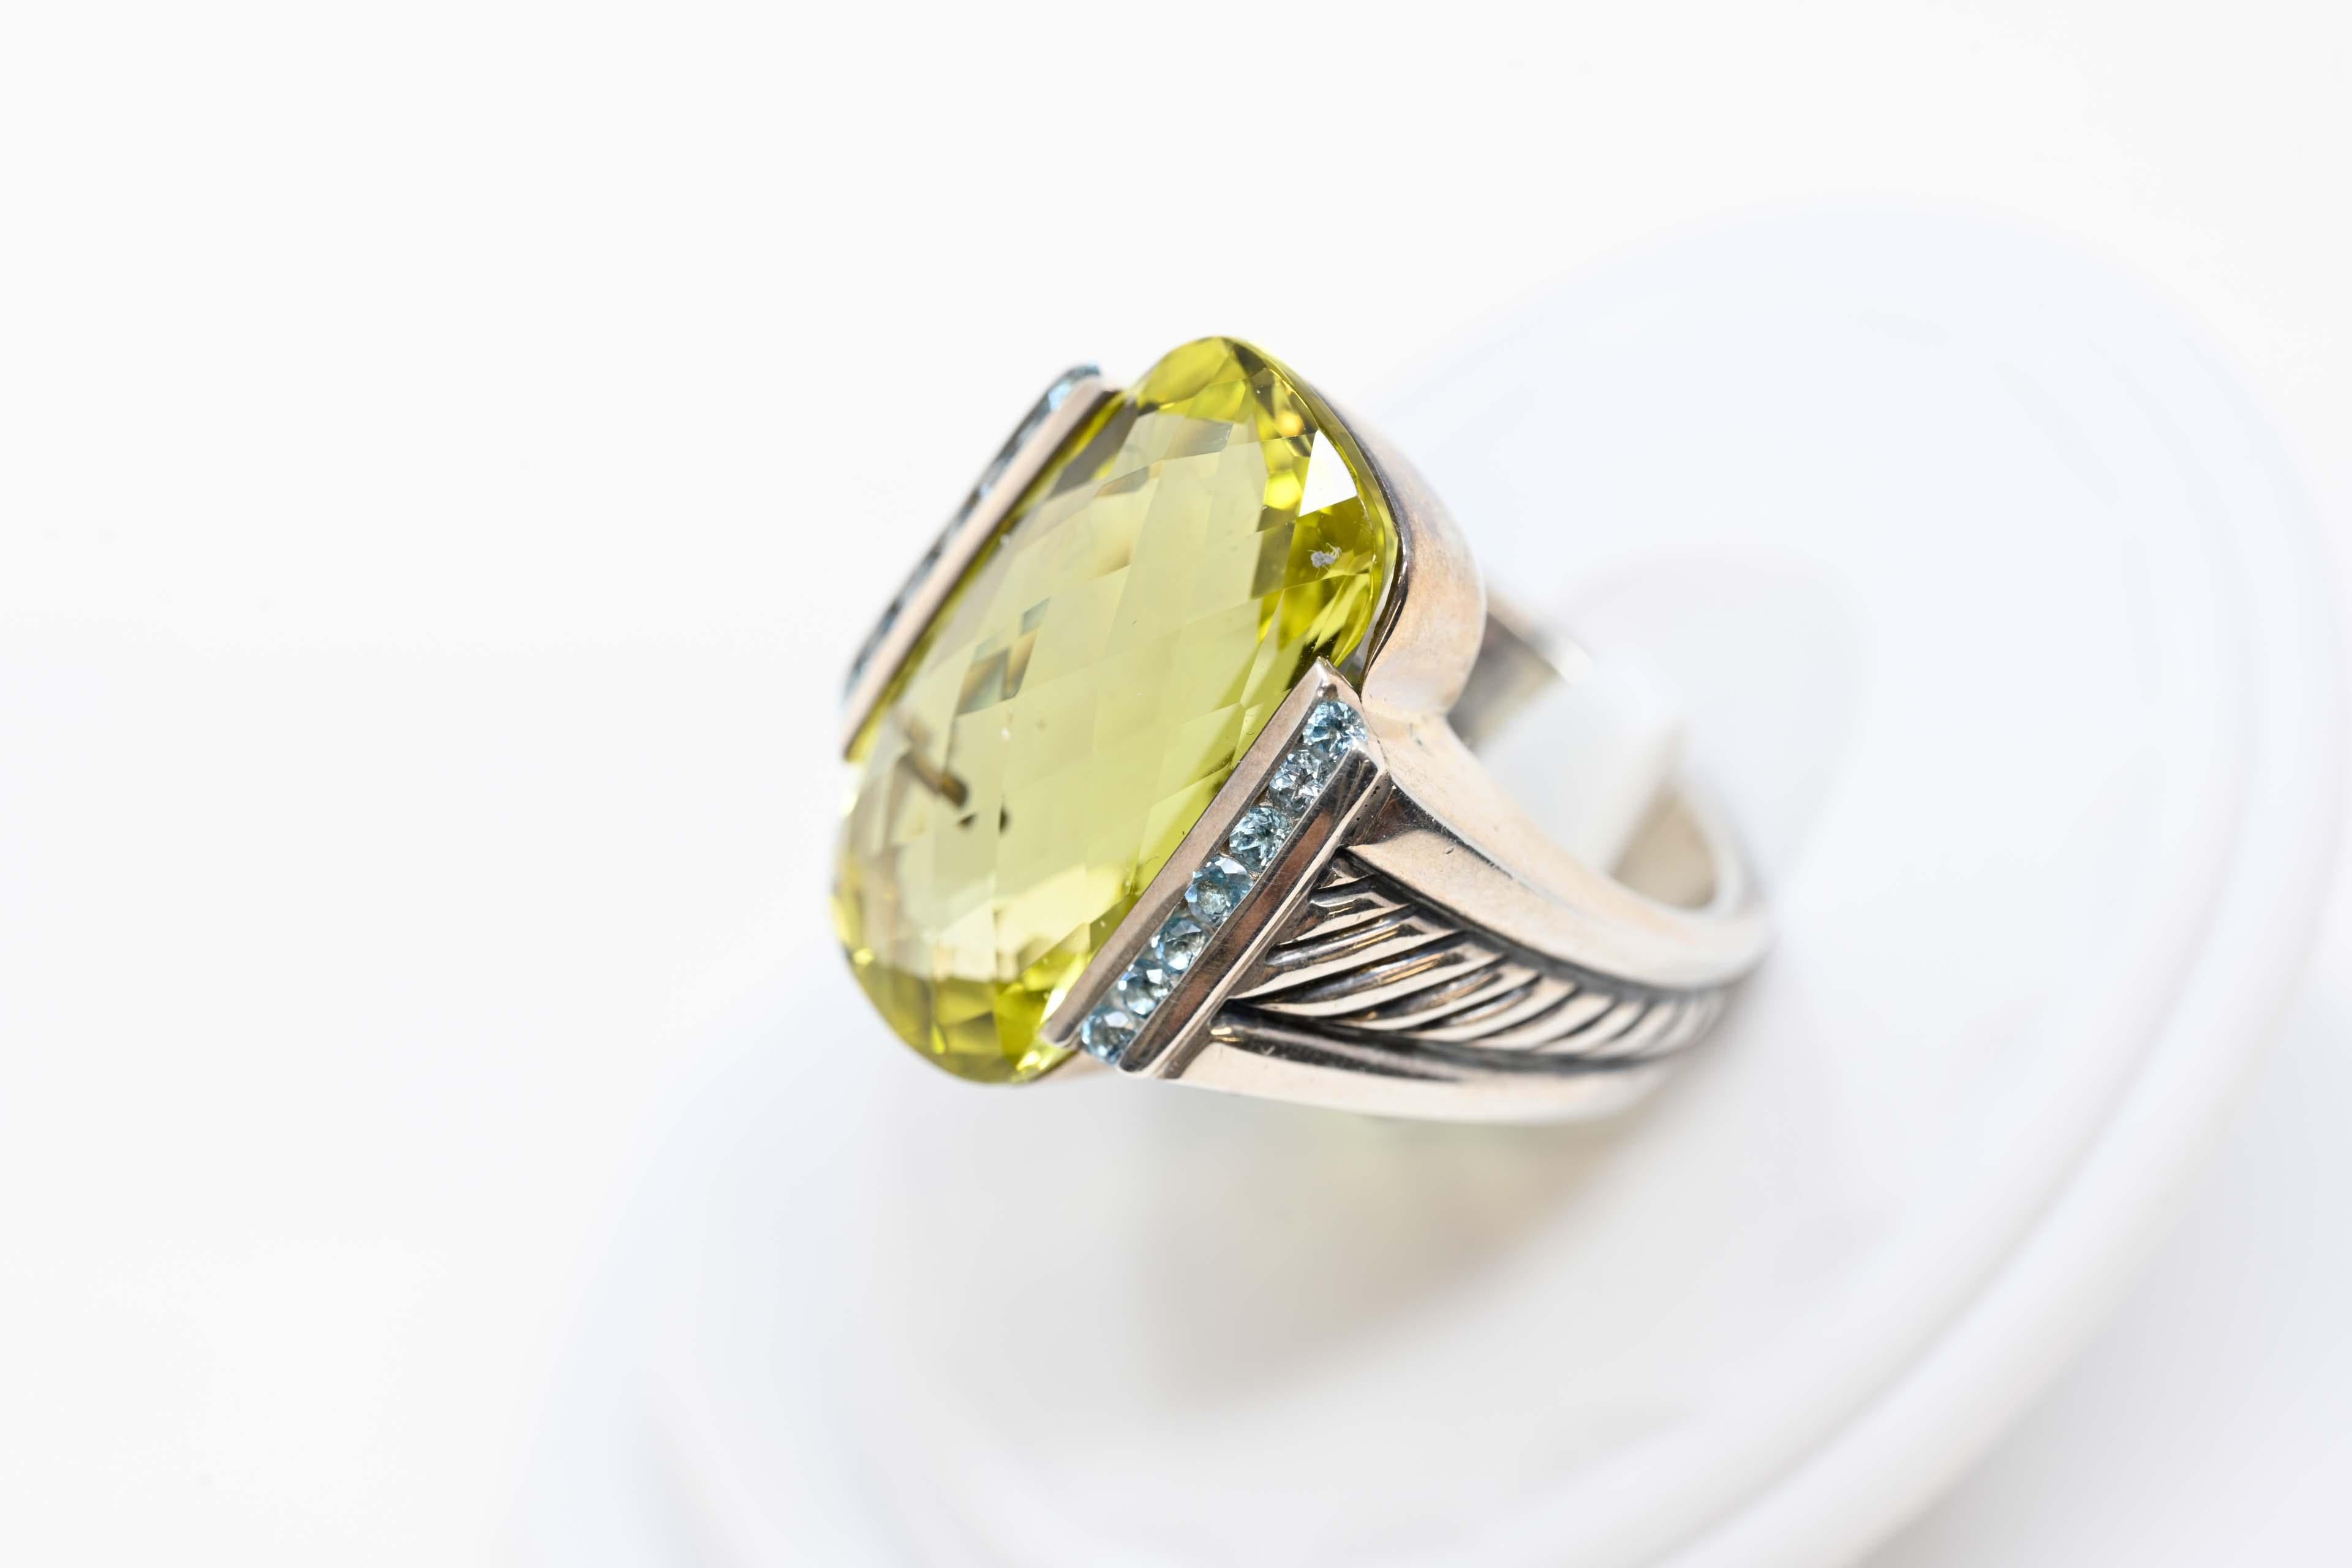 David Yurman art deco style sterling & lemon quartz ring and aqua stones (14). Size 6, marked inside Made in NY, USA during the 21st century. In good condition.